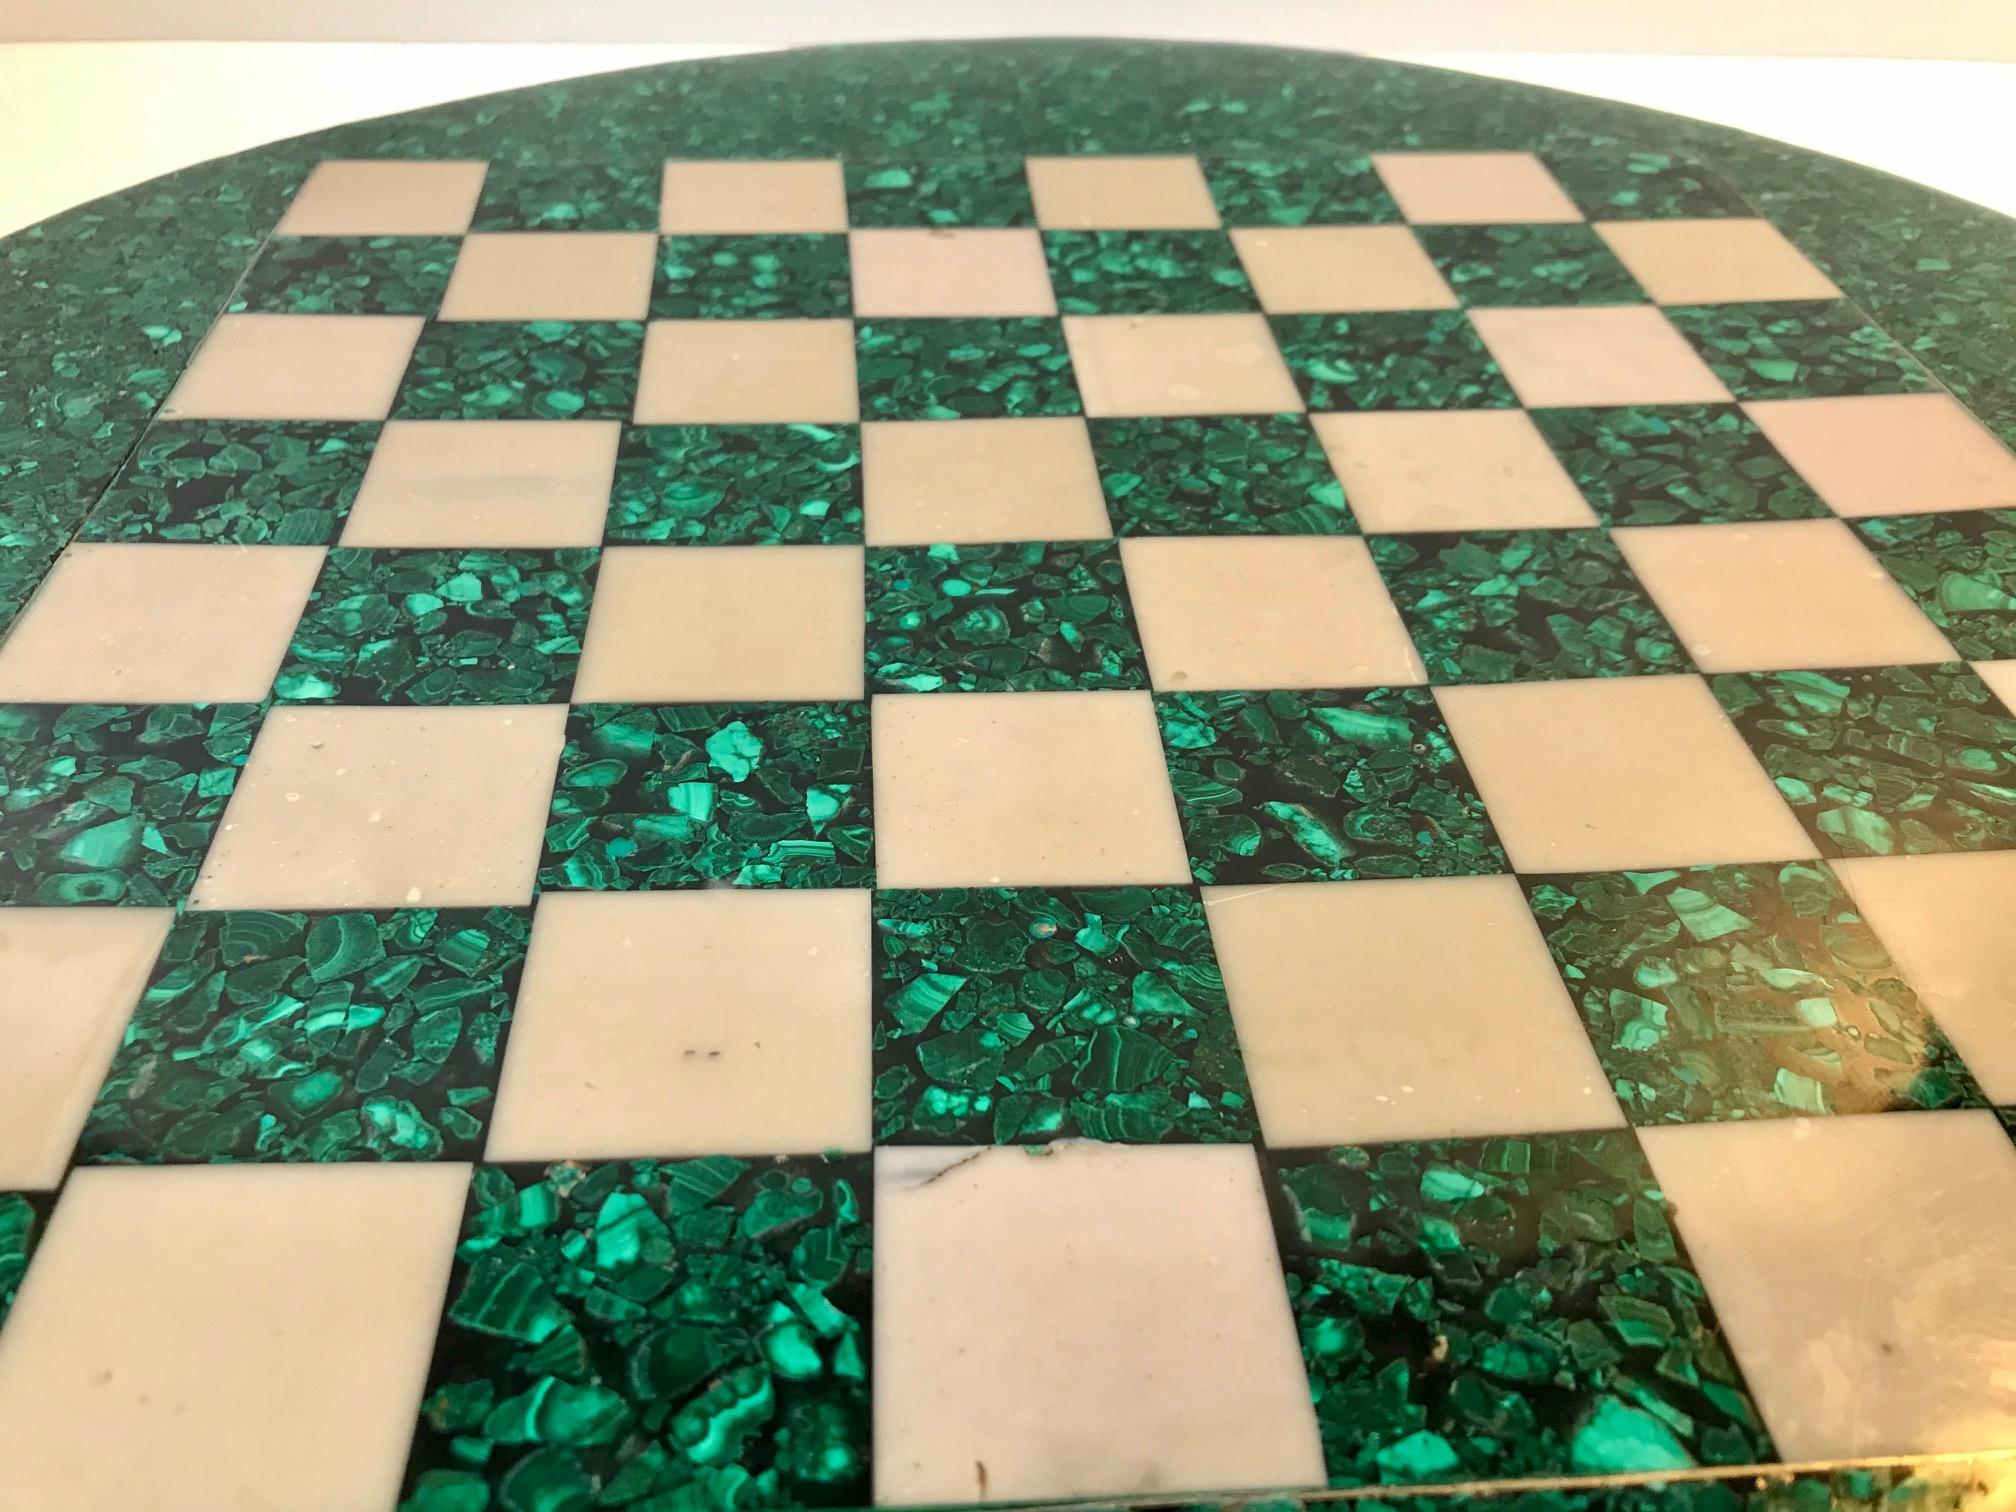 A circular chess board fashioned from malachite and bone Marple. Manufactured in Italy during the 1960s or 1970s.